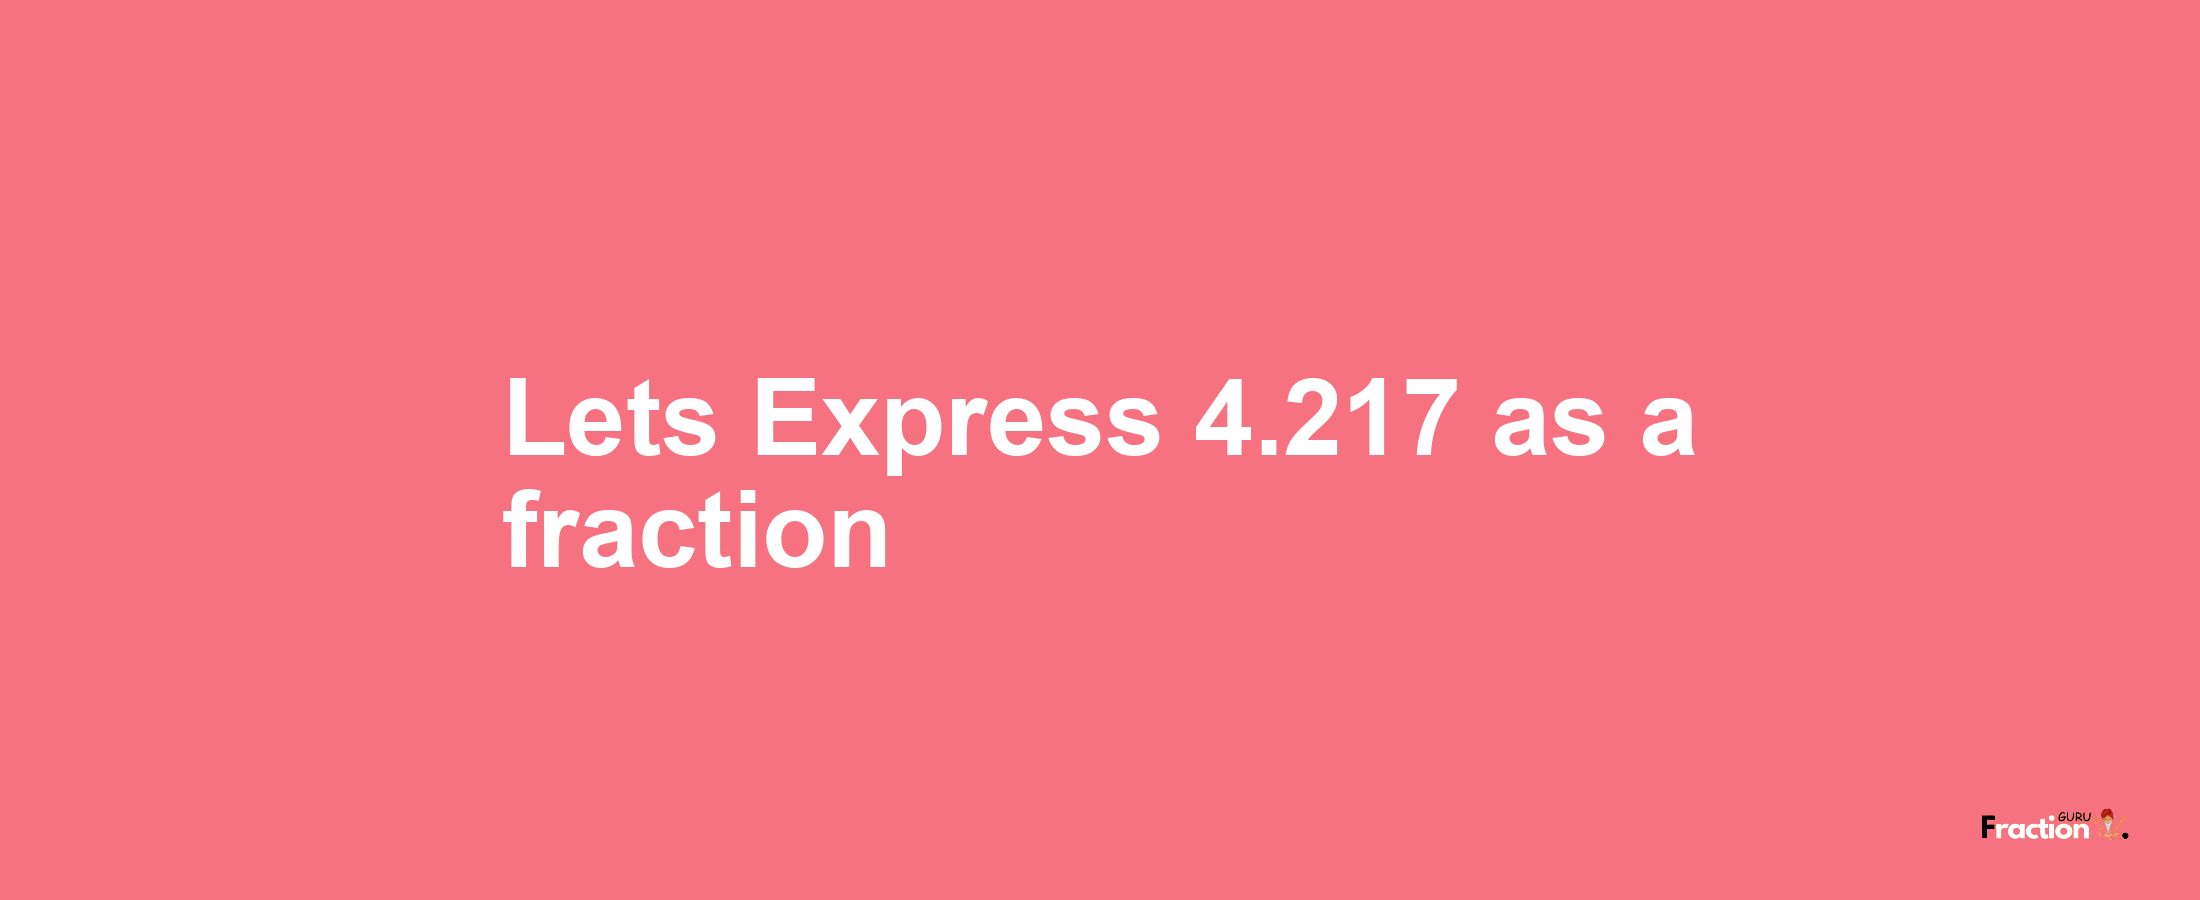 Lets Express 4.217 as afraction